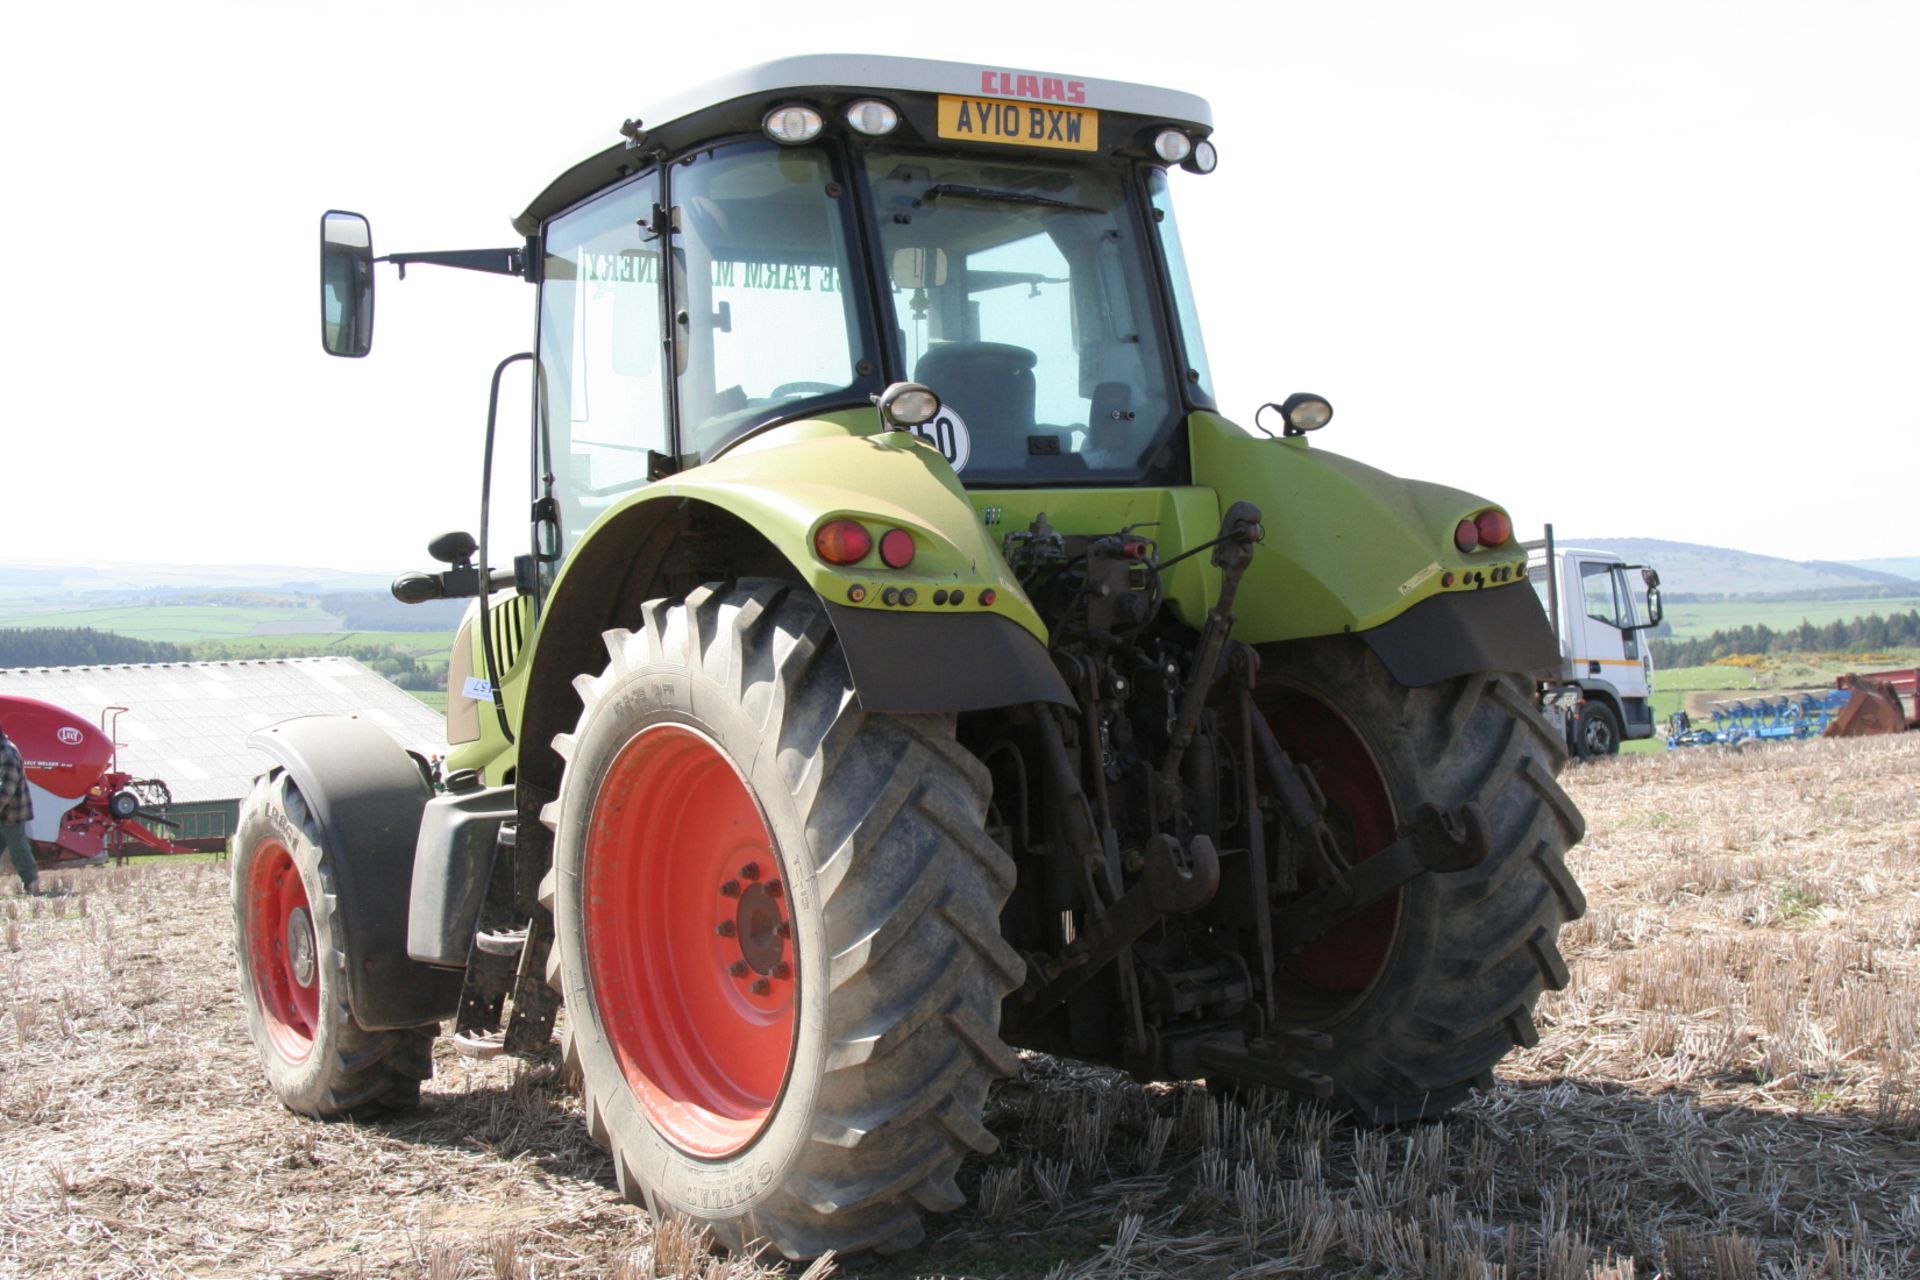 Claas Arion 630 Tractor 50k AY10 BXW 6,673 hours - Image 3 of 10